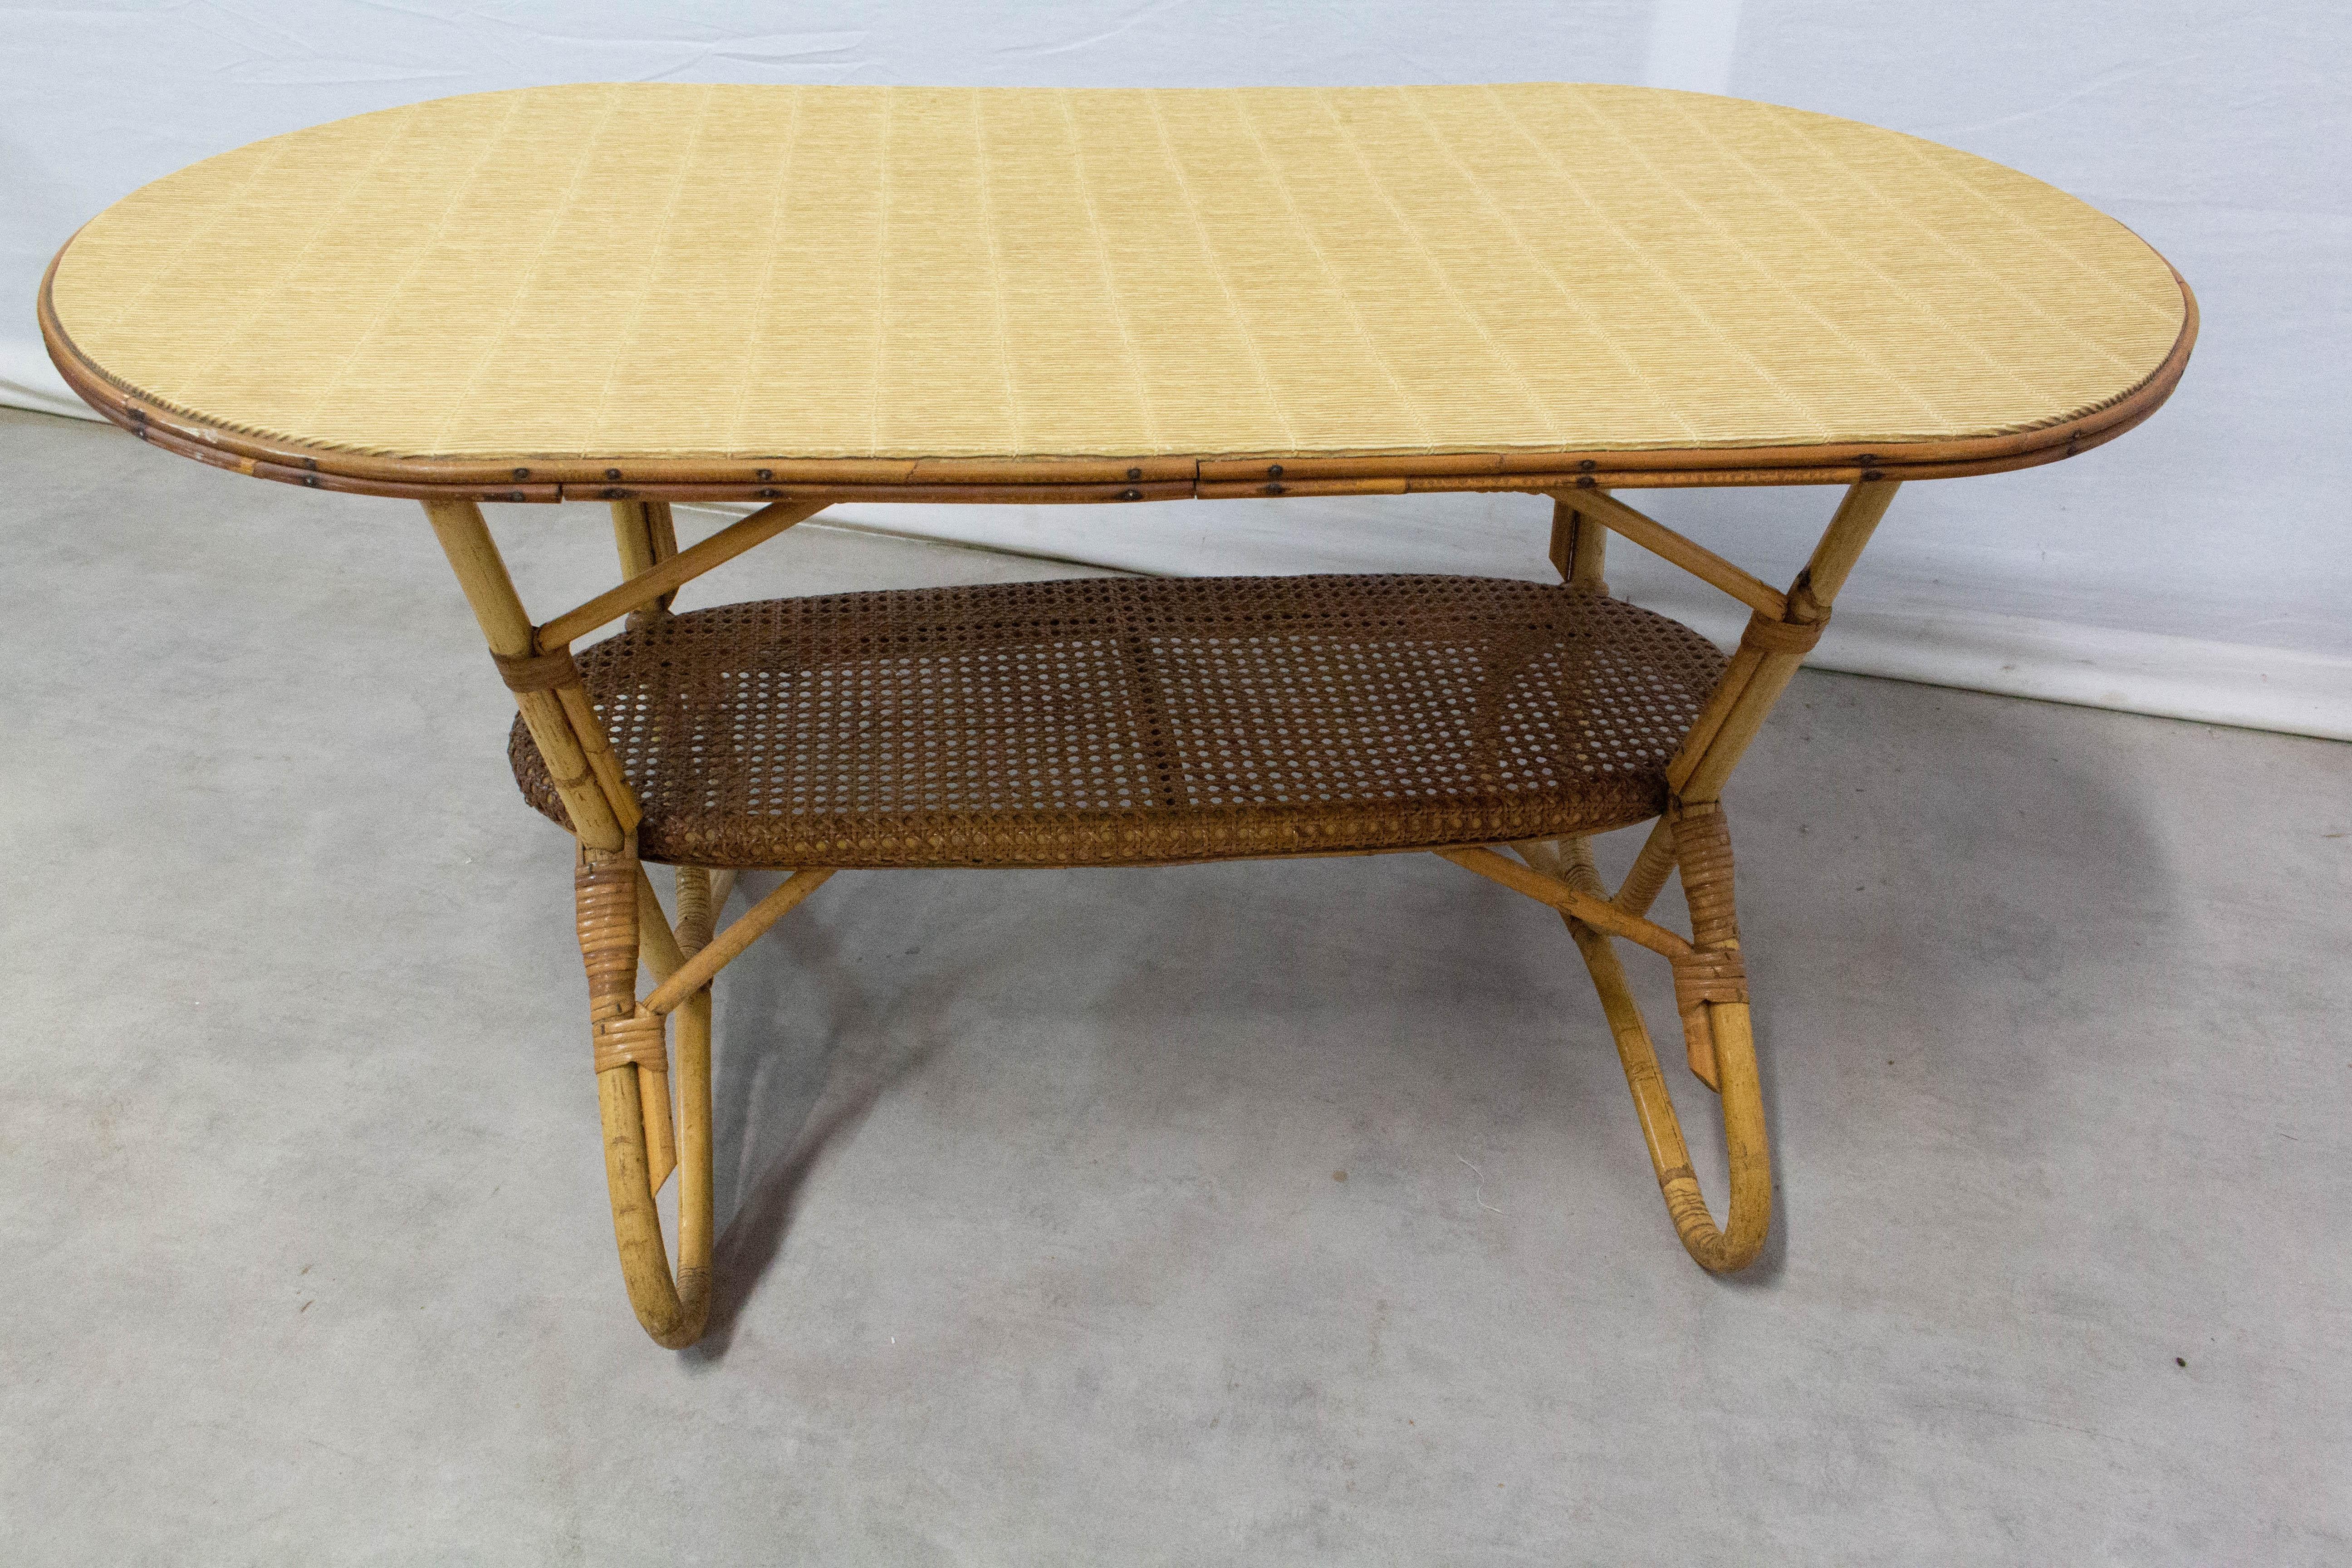 Rattan coffee table, weaving imitation top
French, circa 1970
Very good condition

For shipping: 51 x 101 x 57 cm 6.5 kg.